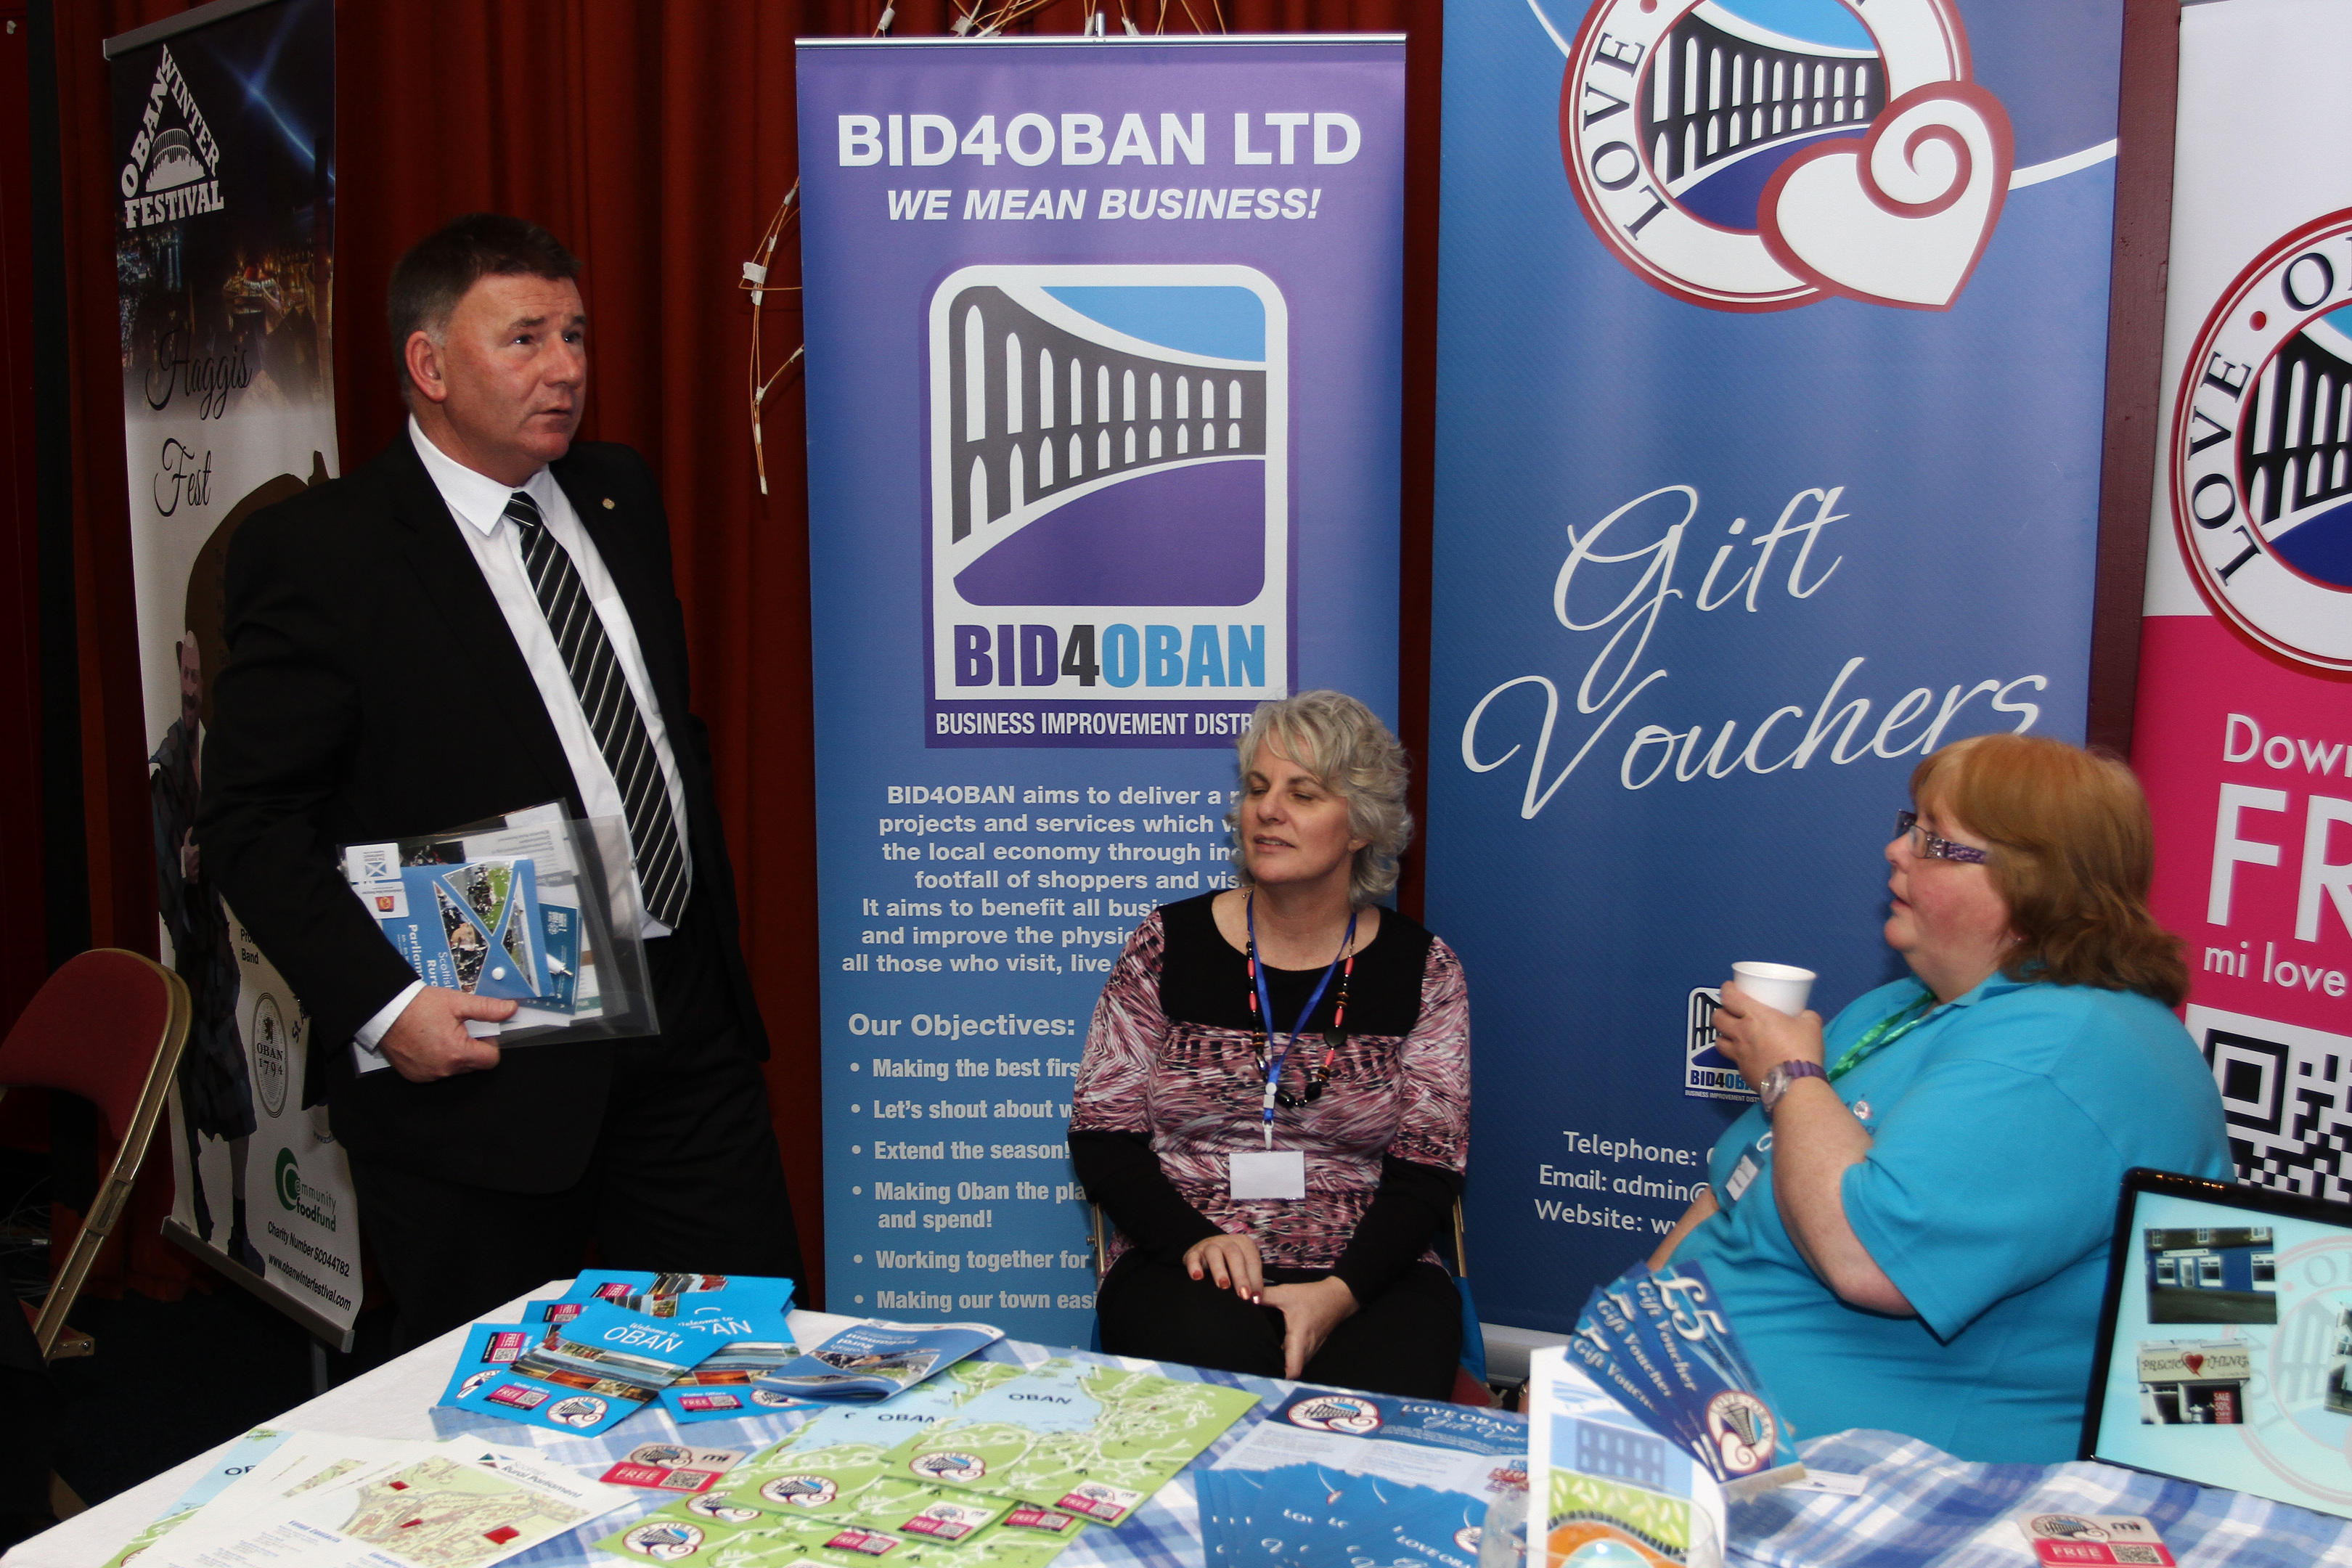 Councillor Roddie McCuish with Yvonne MacDougall at the Bid4Oban stand at the Rural Parliament conference. Picture by Kevin Mcglynn